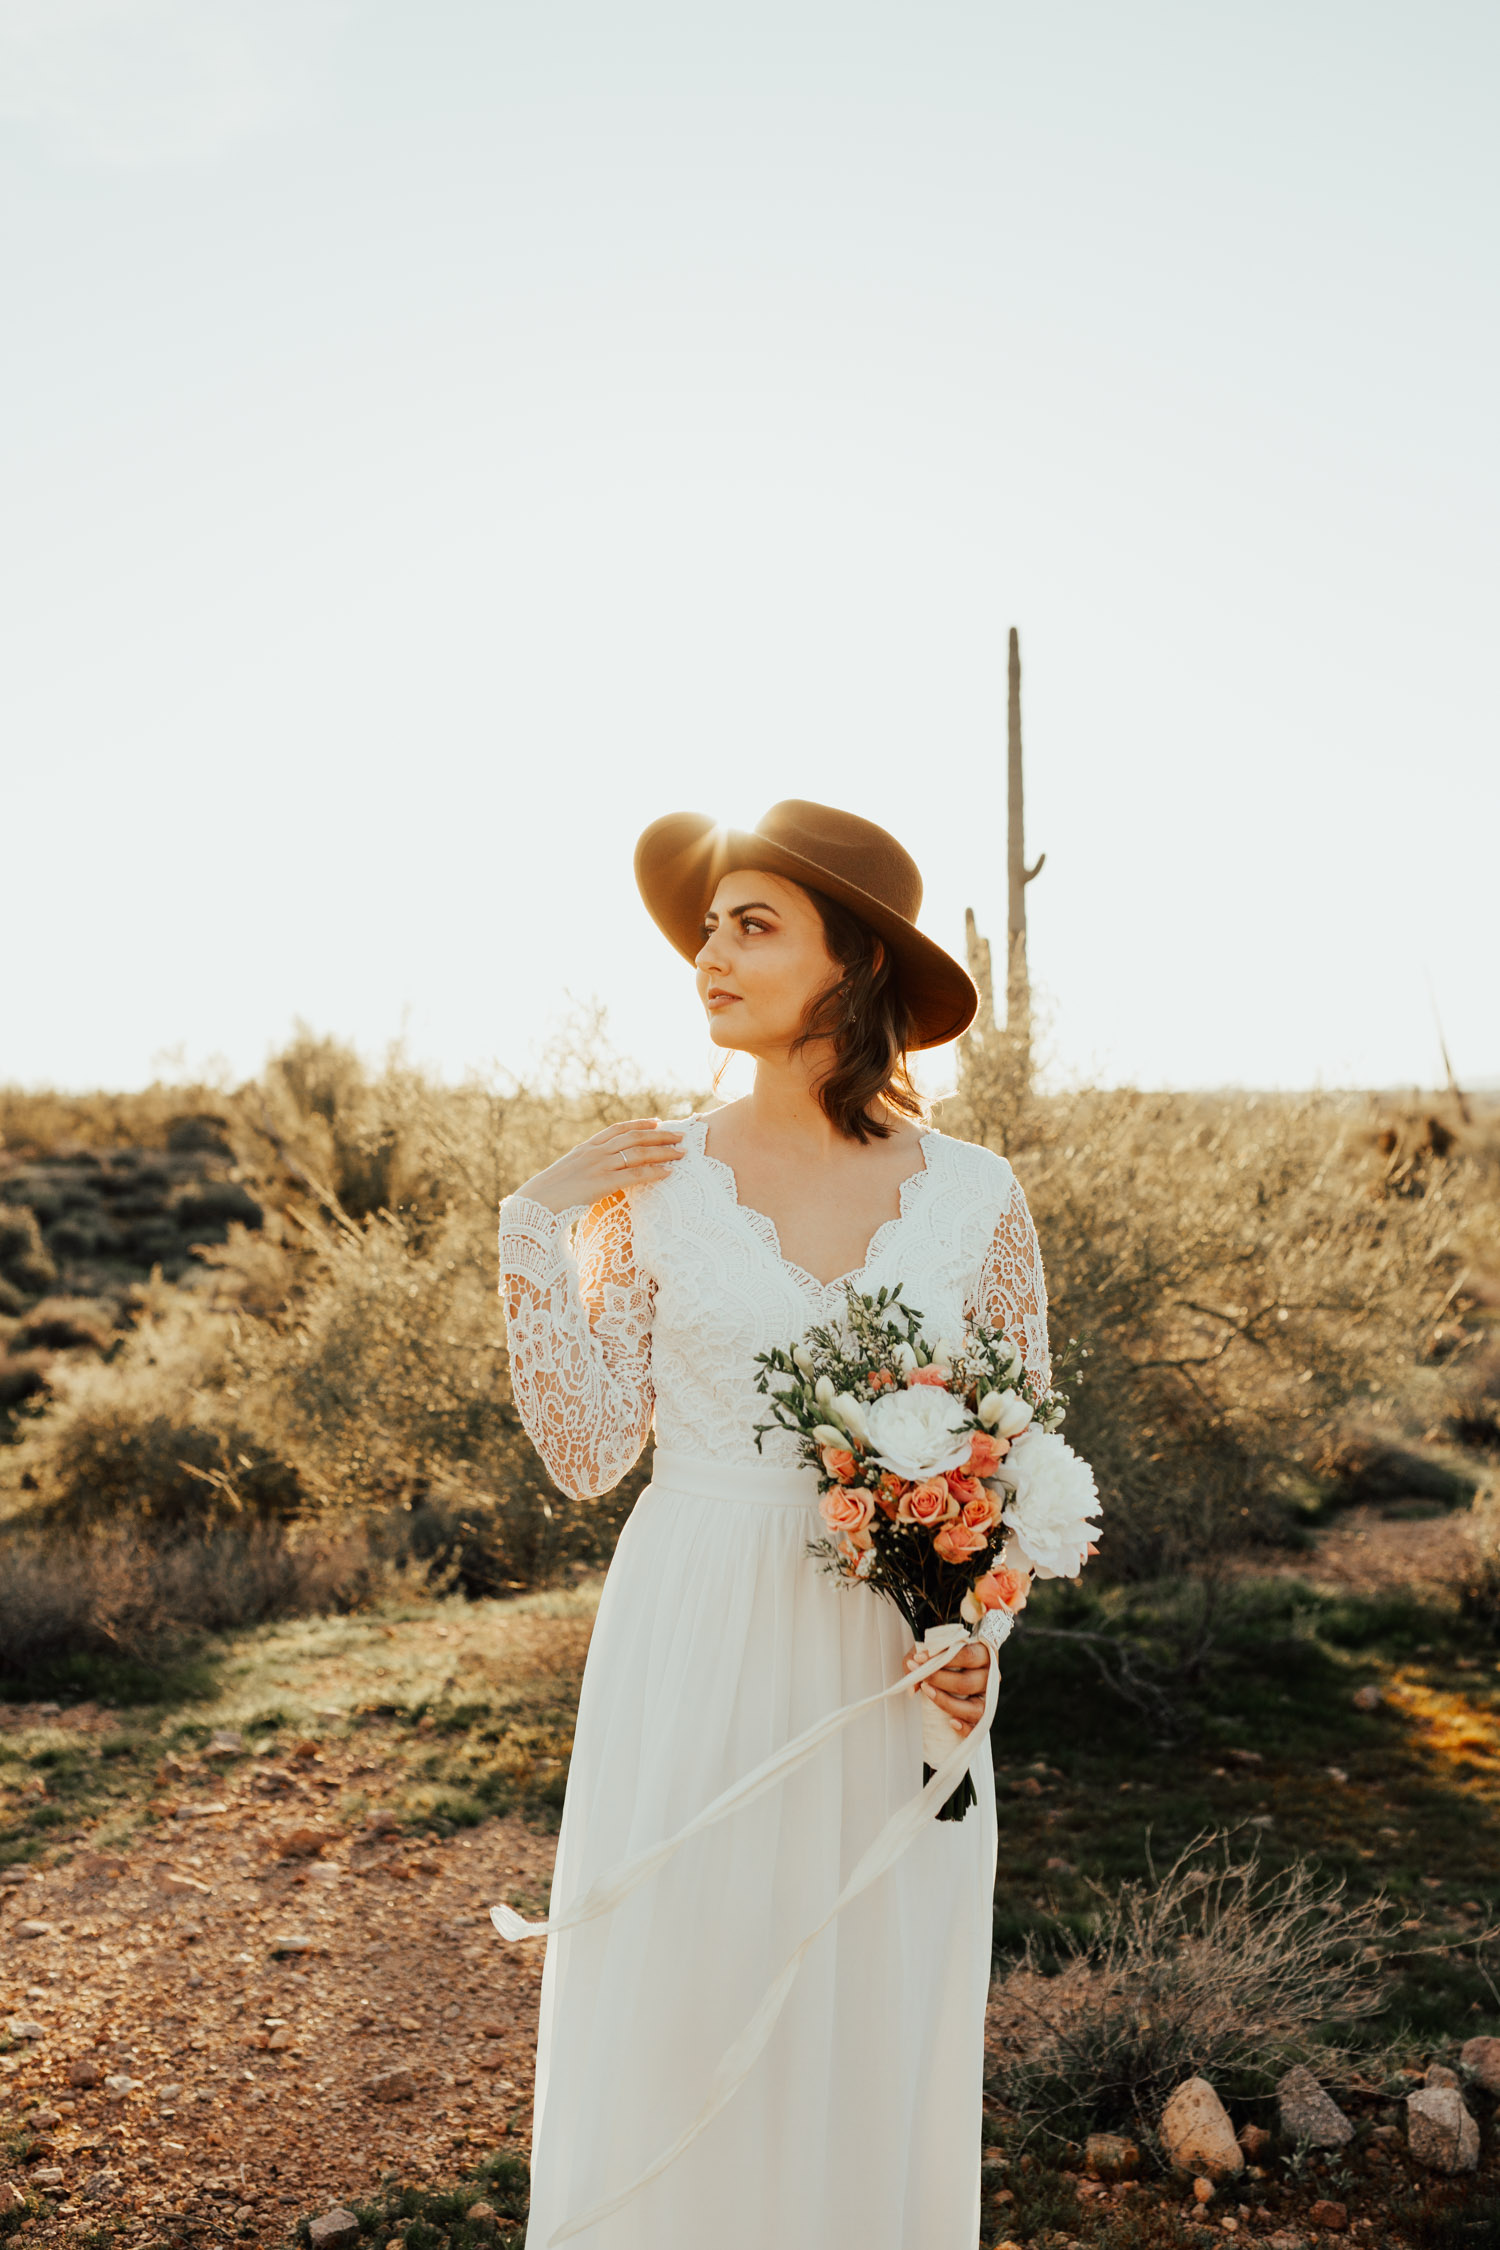 Laken + Camille — Hillary Lacy Photography